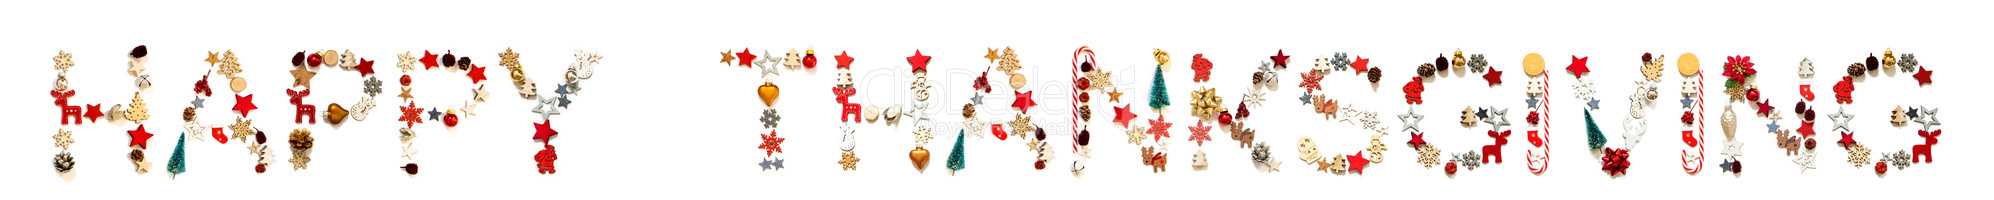 Colorful Christmas Decoration Letter Building Word Happy Thanksgiving